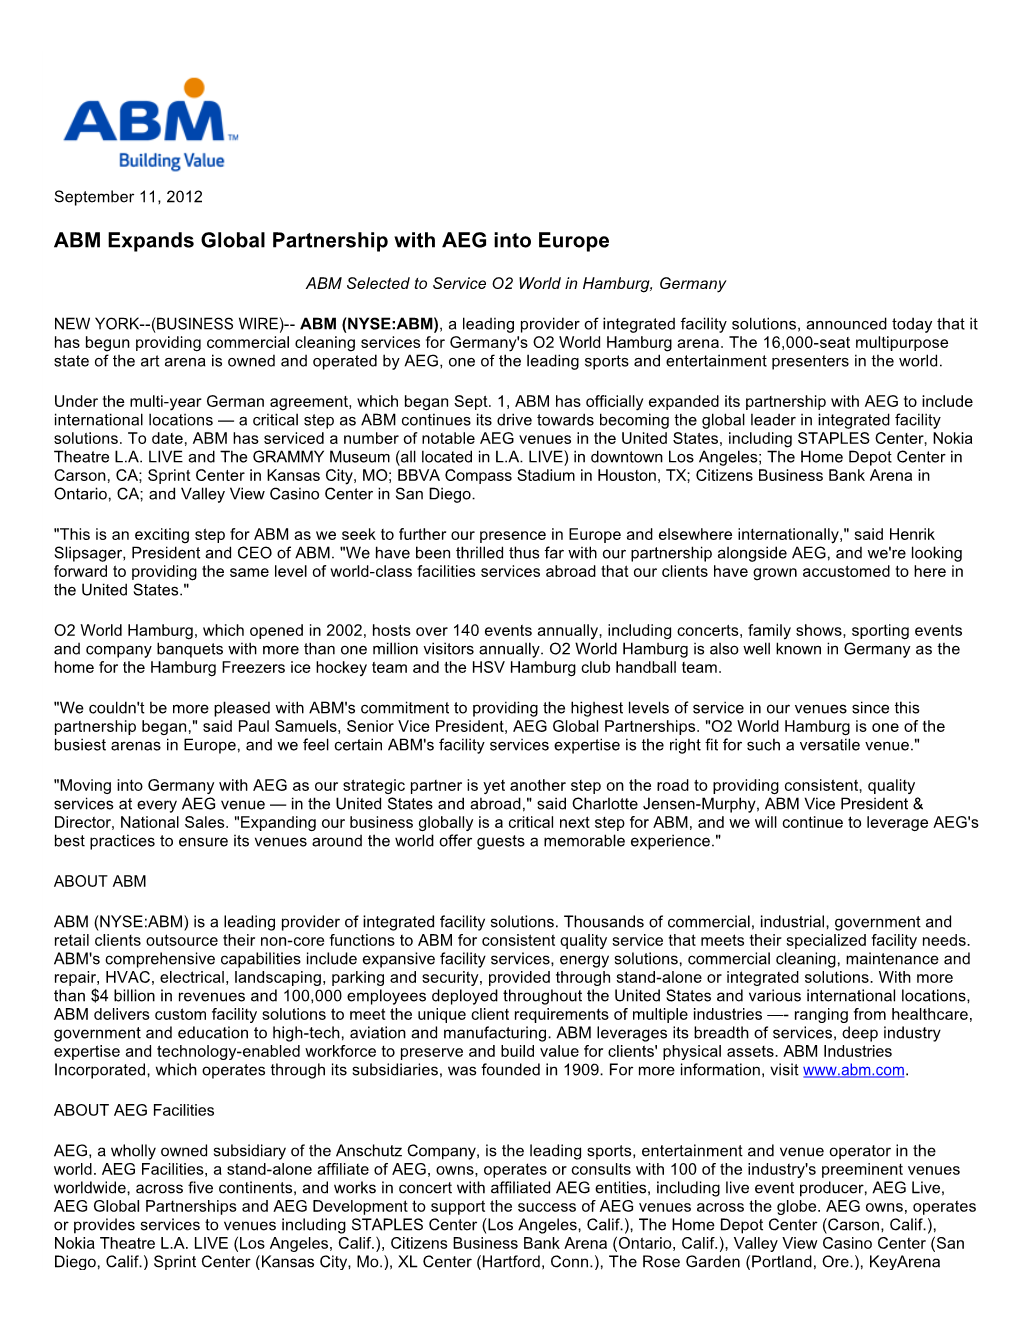 ABM Expands Global Partnership with AEG Into Europe